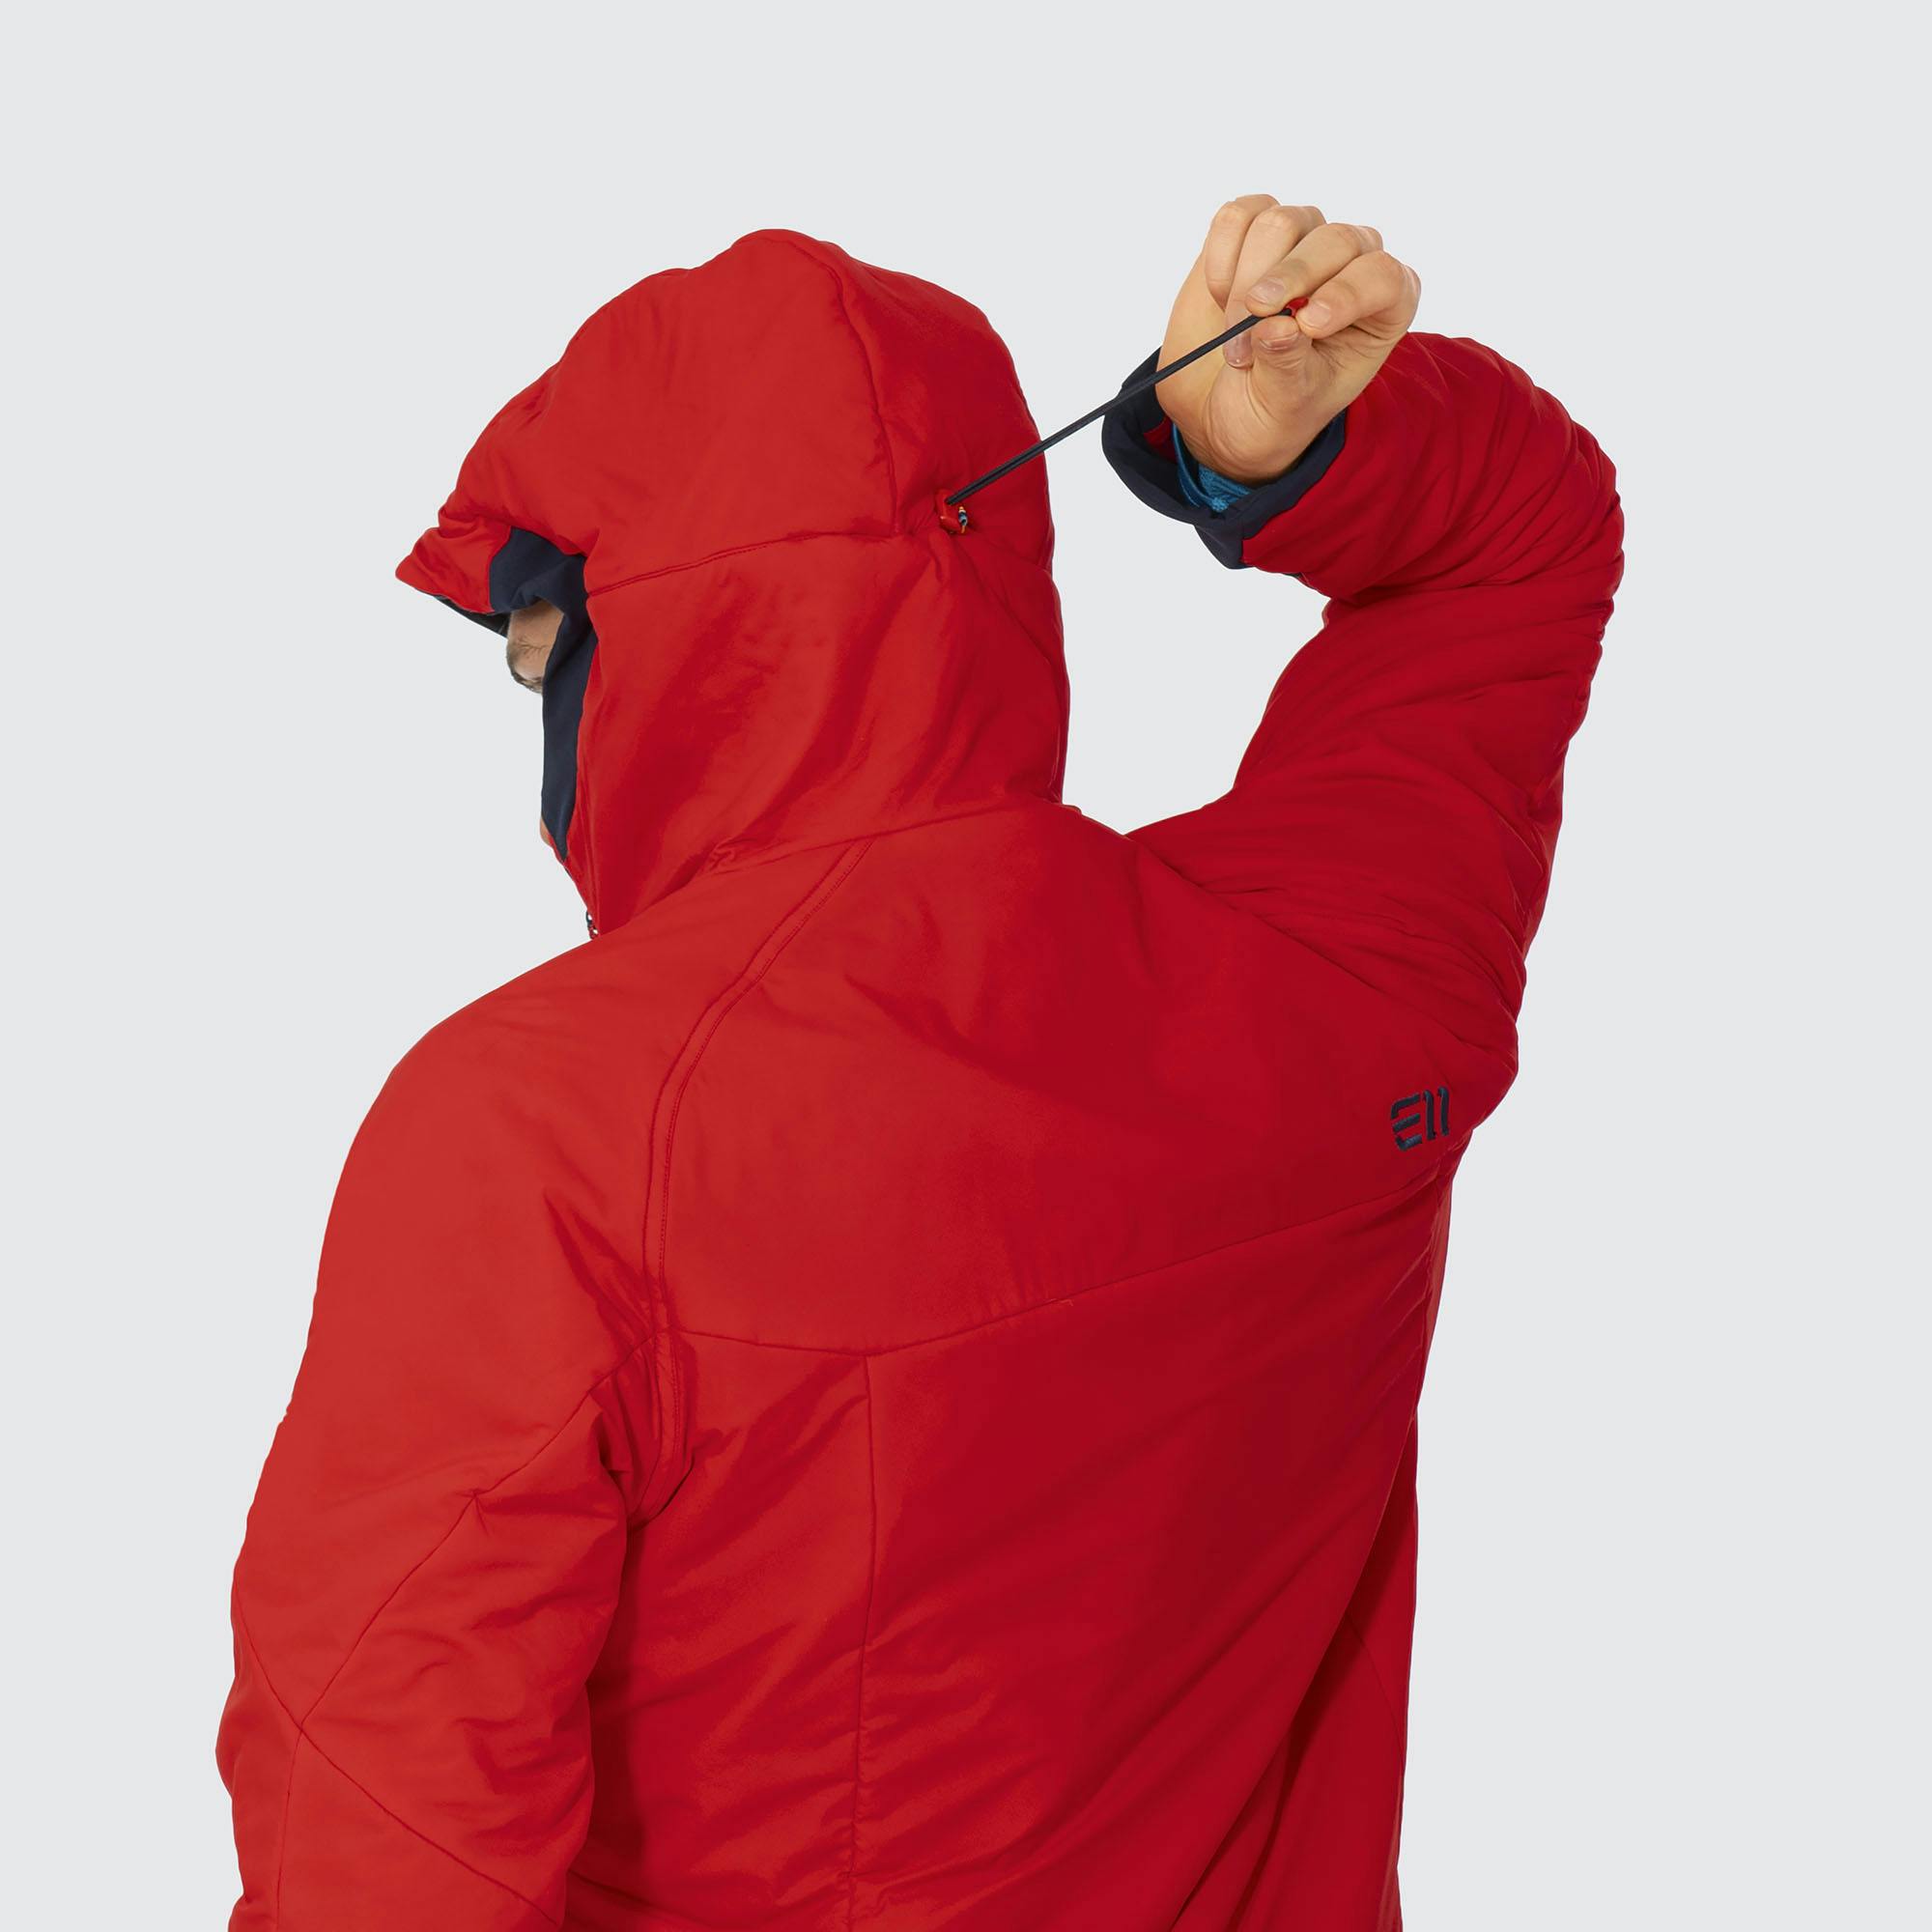 m_transition_insulation_jacket_red_glow_solid_150-20404_mod6